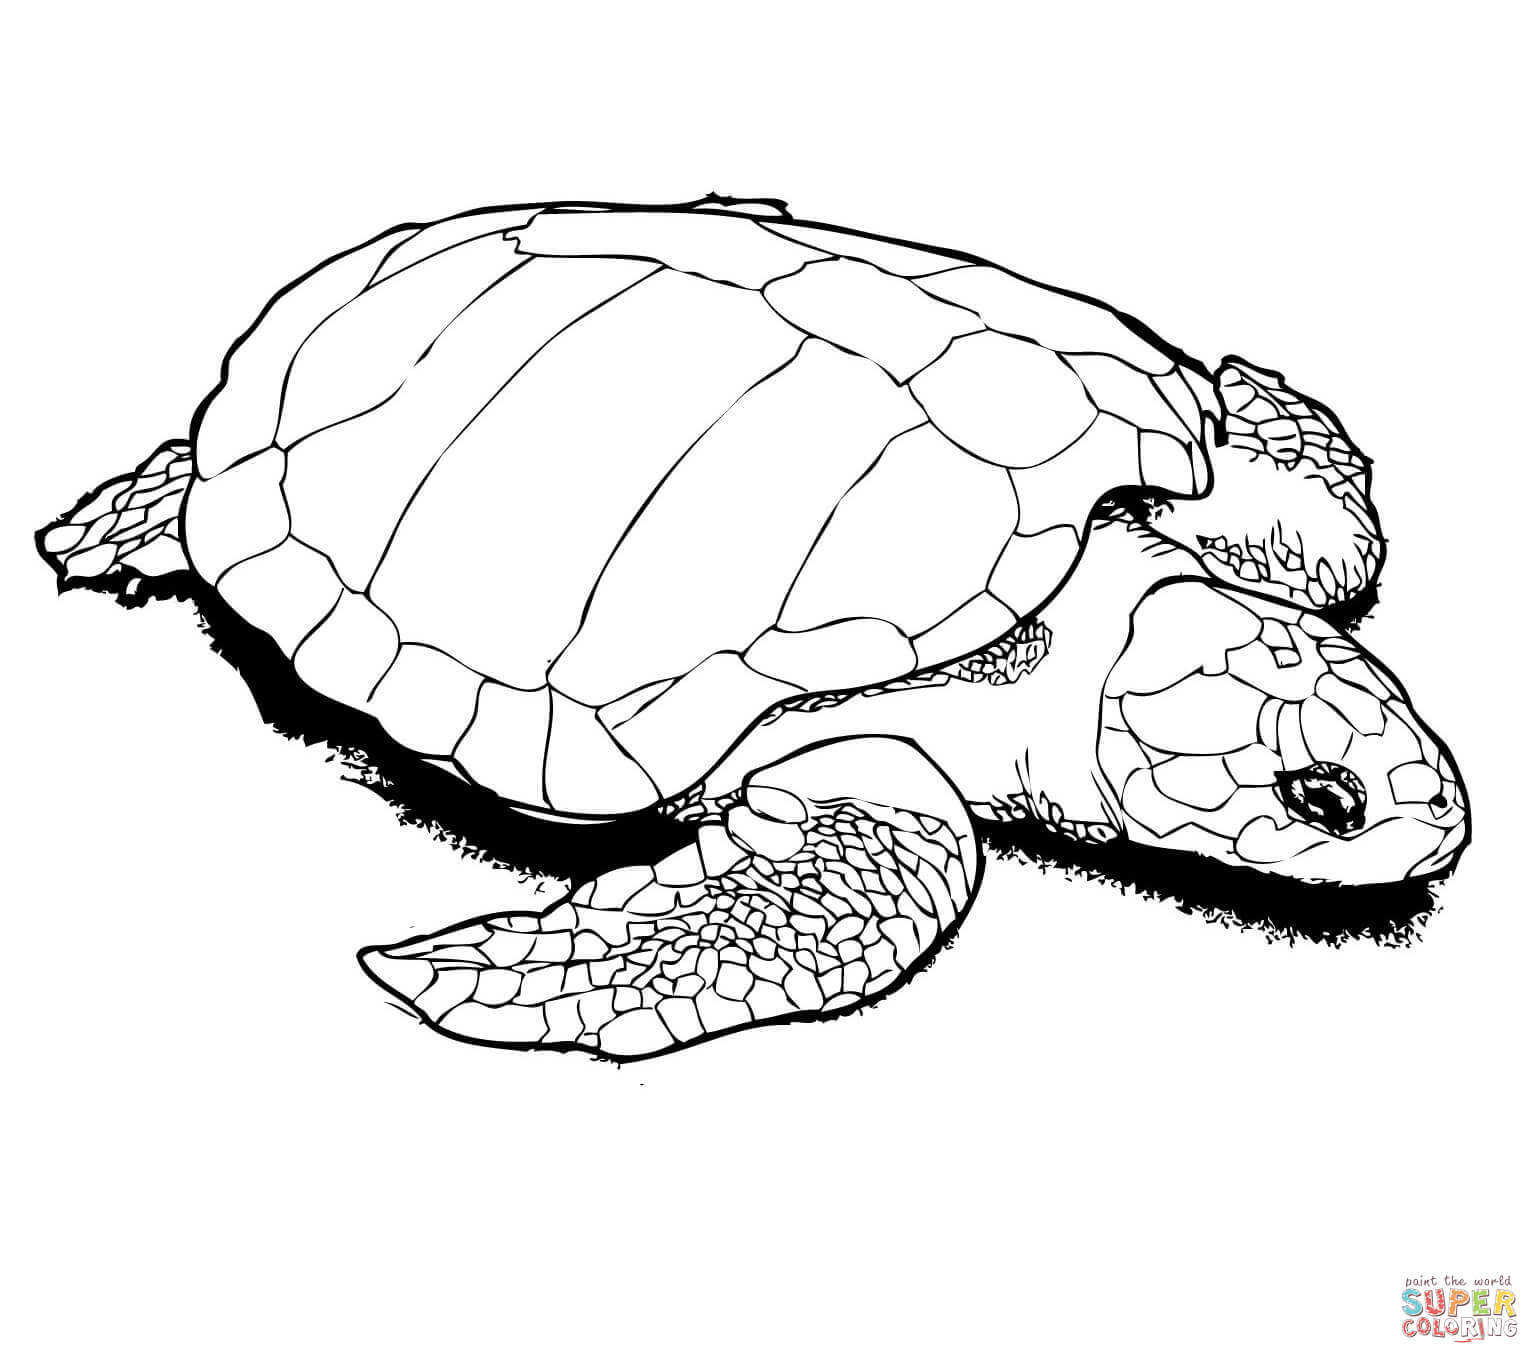 Turtles coloring pages | Free Coloring Pages